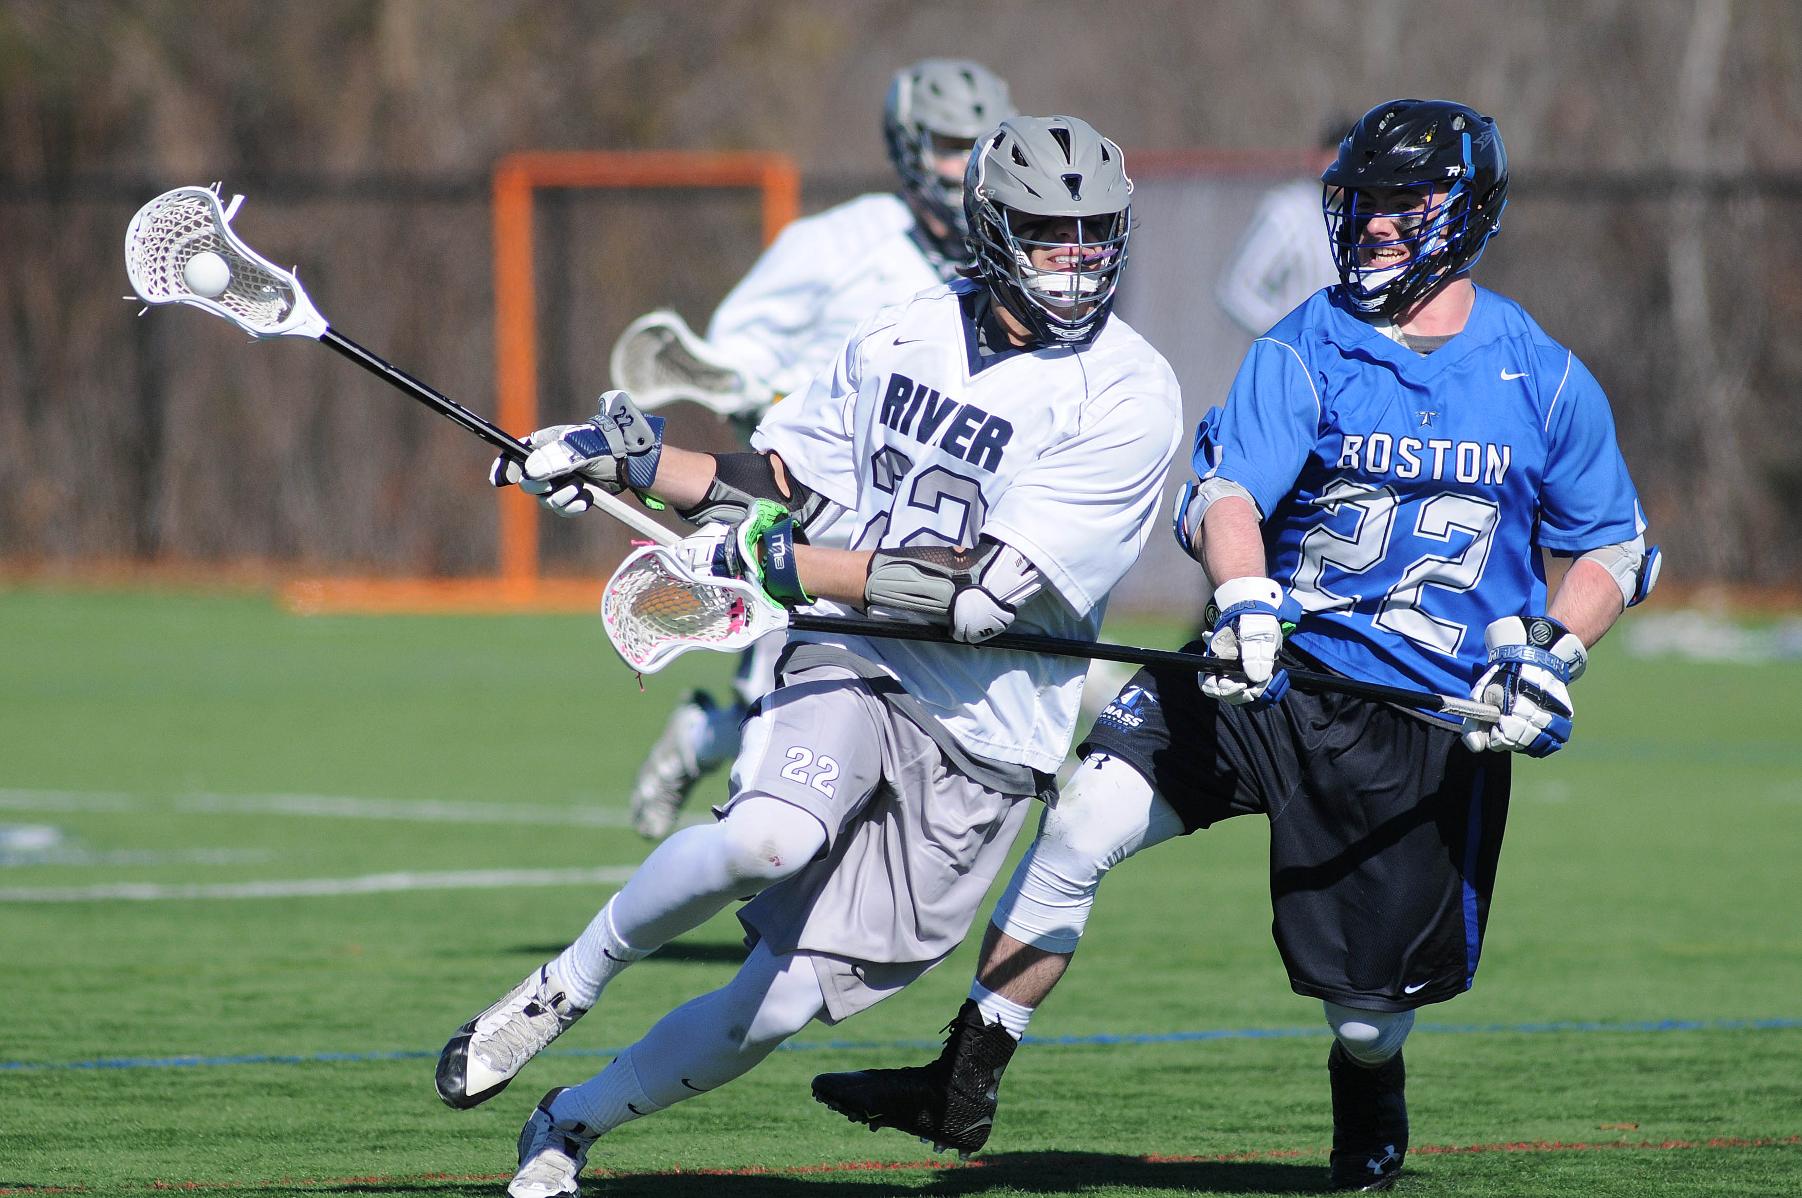 Rivier Falls 12 - 7 to Lasell